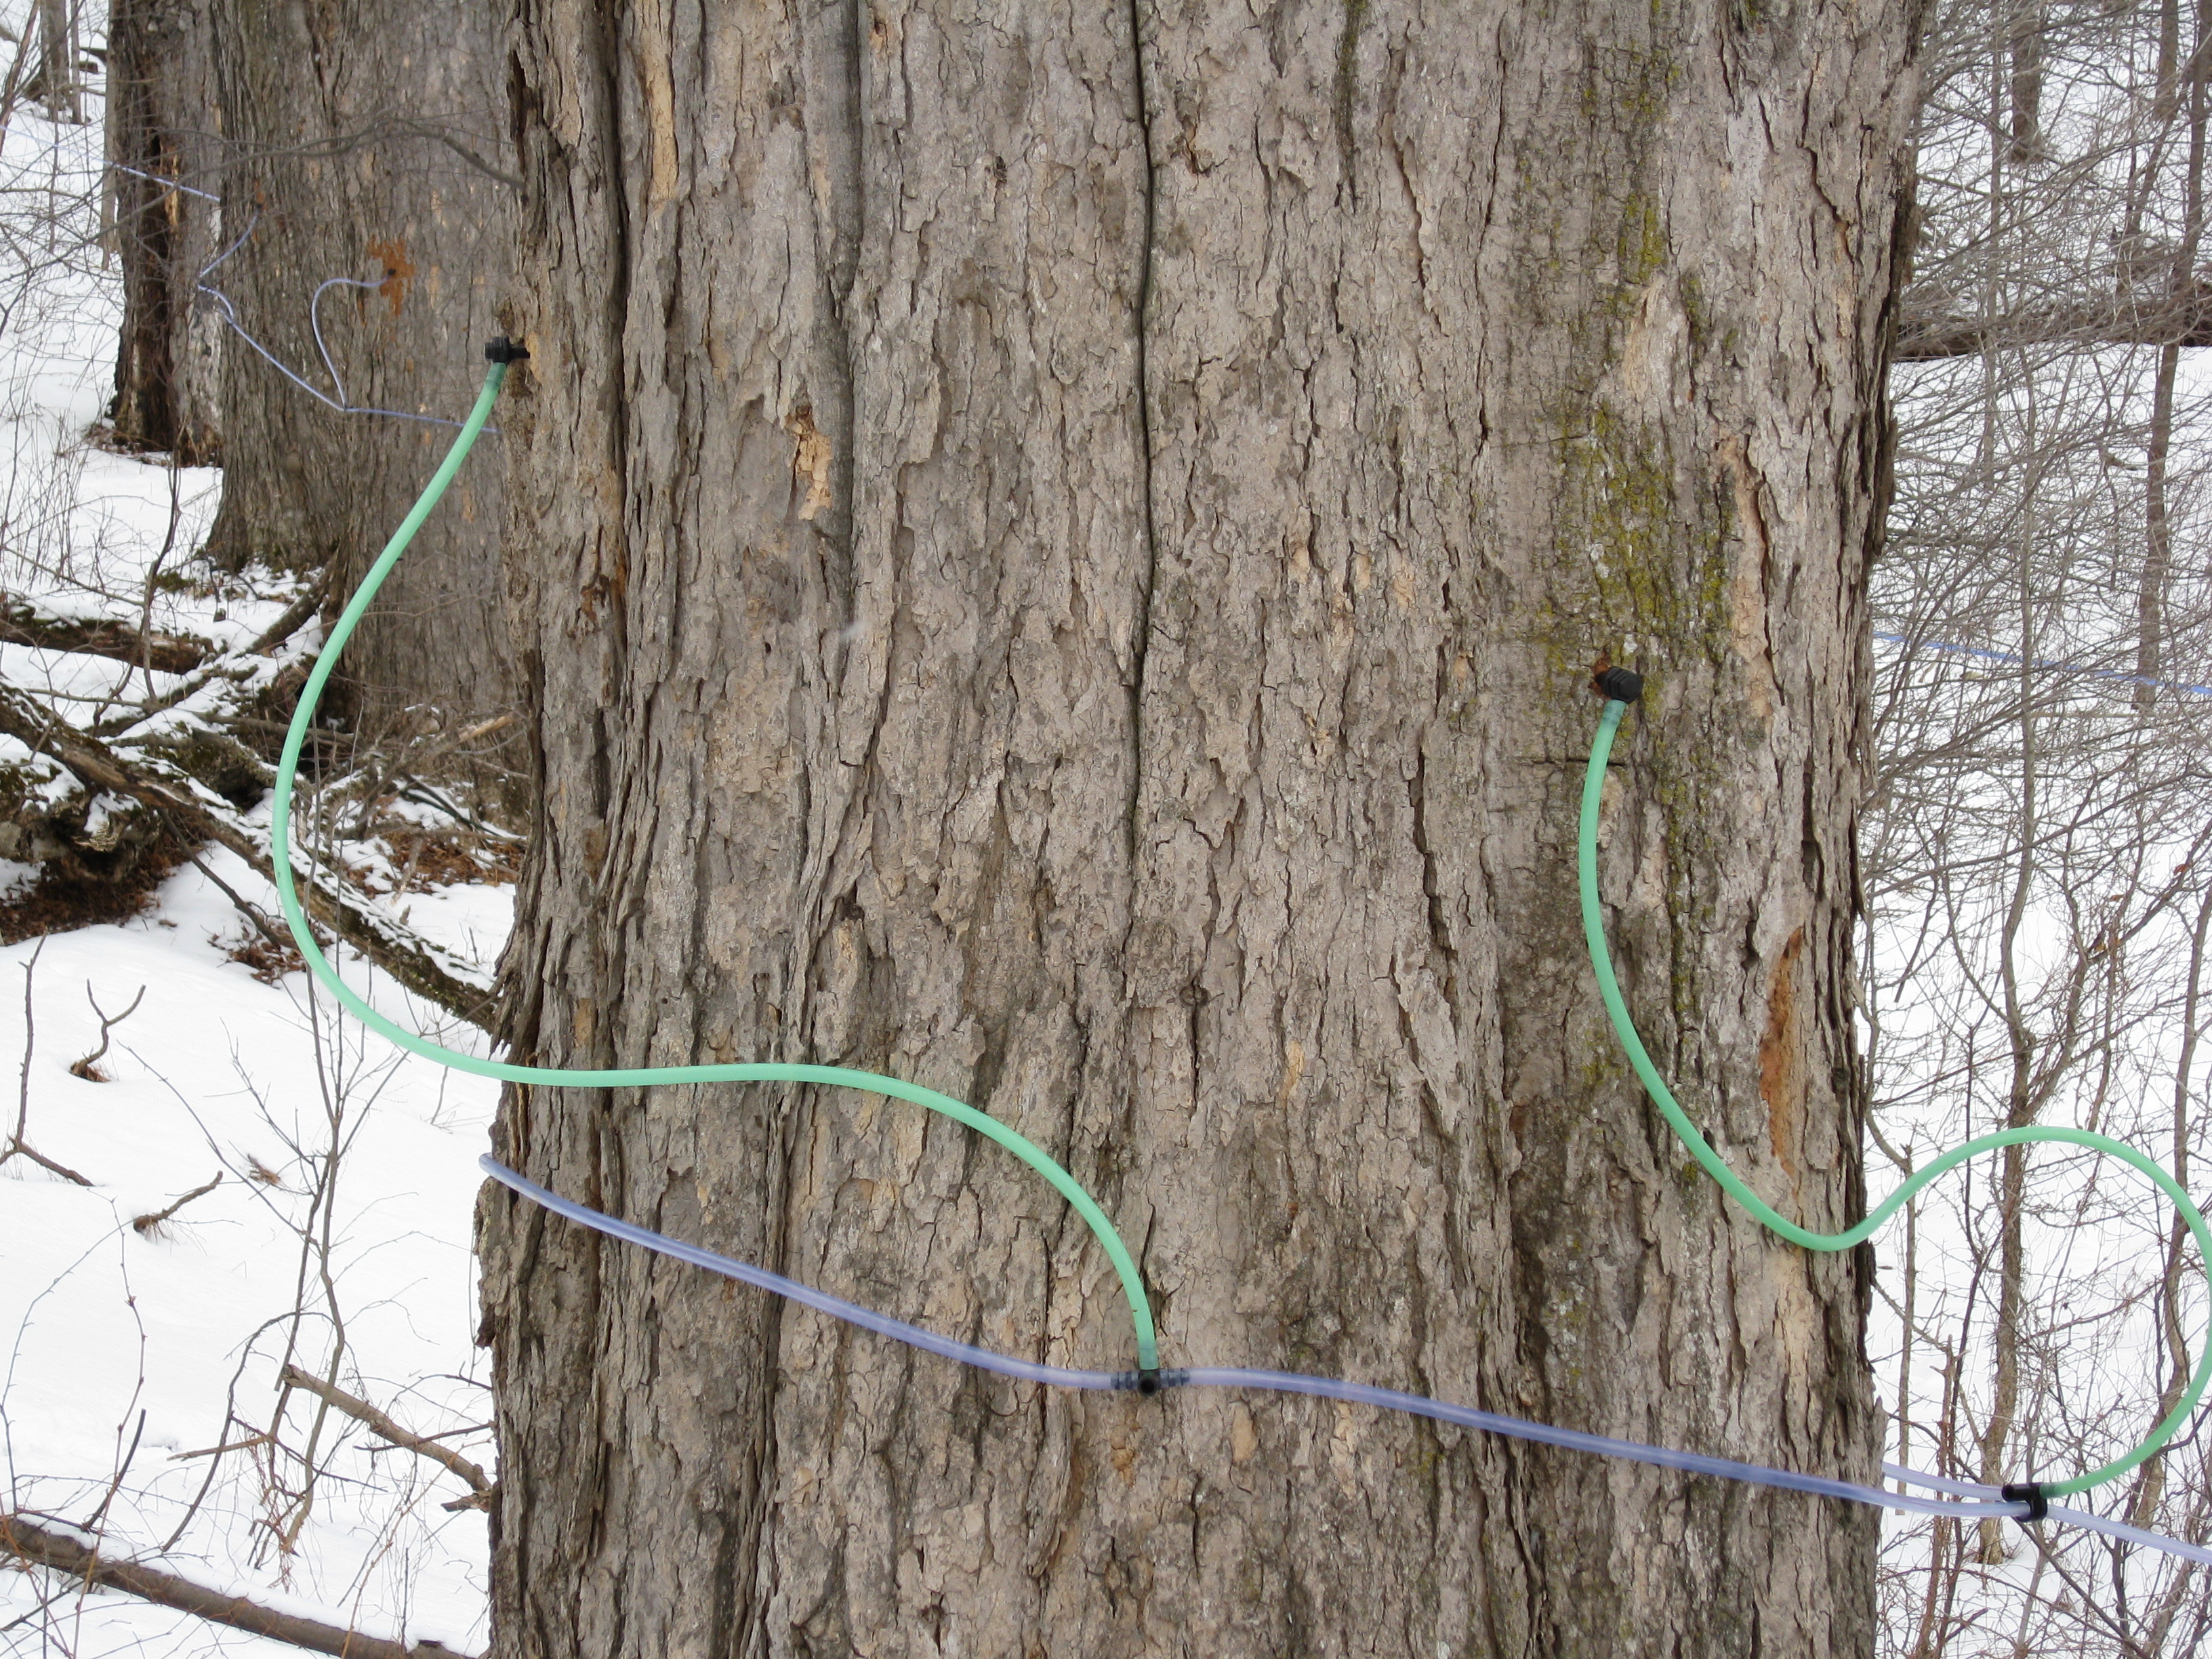 Collecting sap with tubing